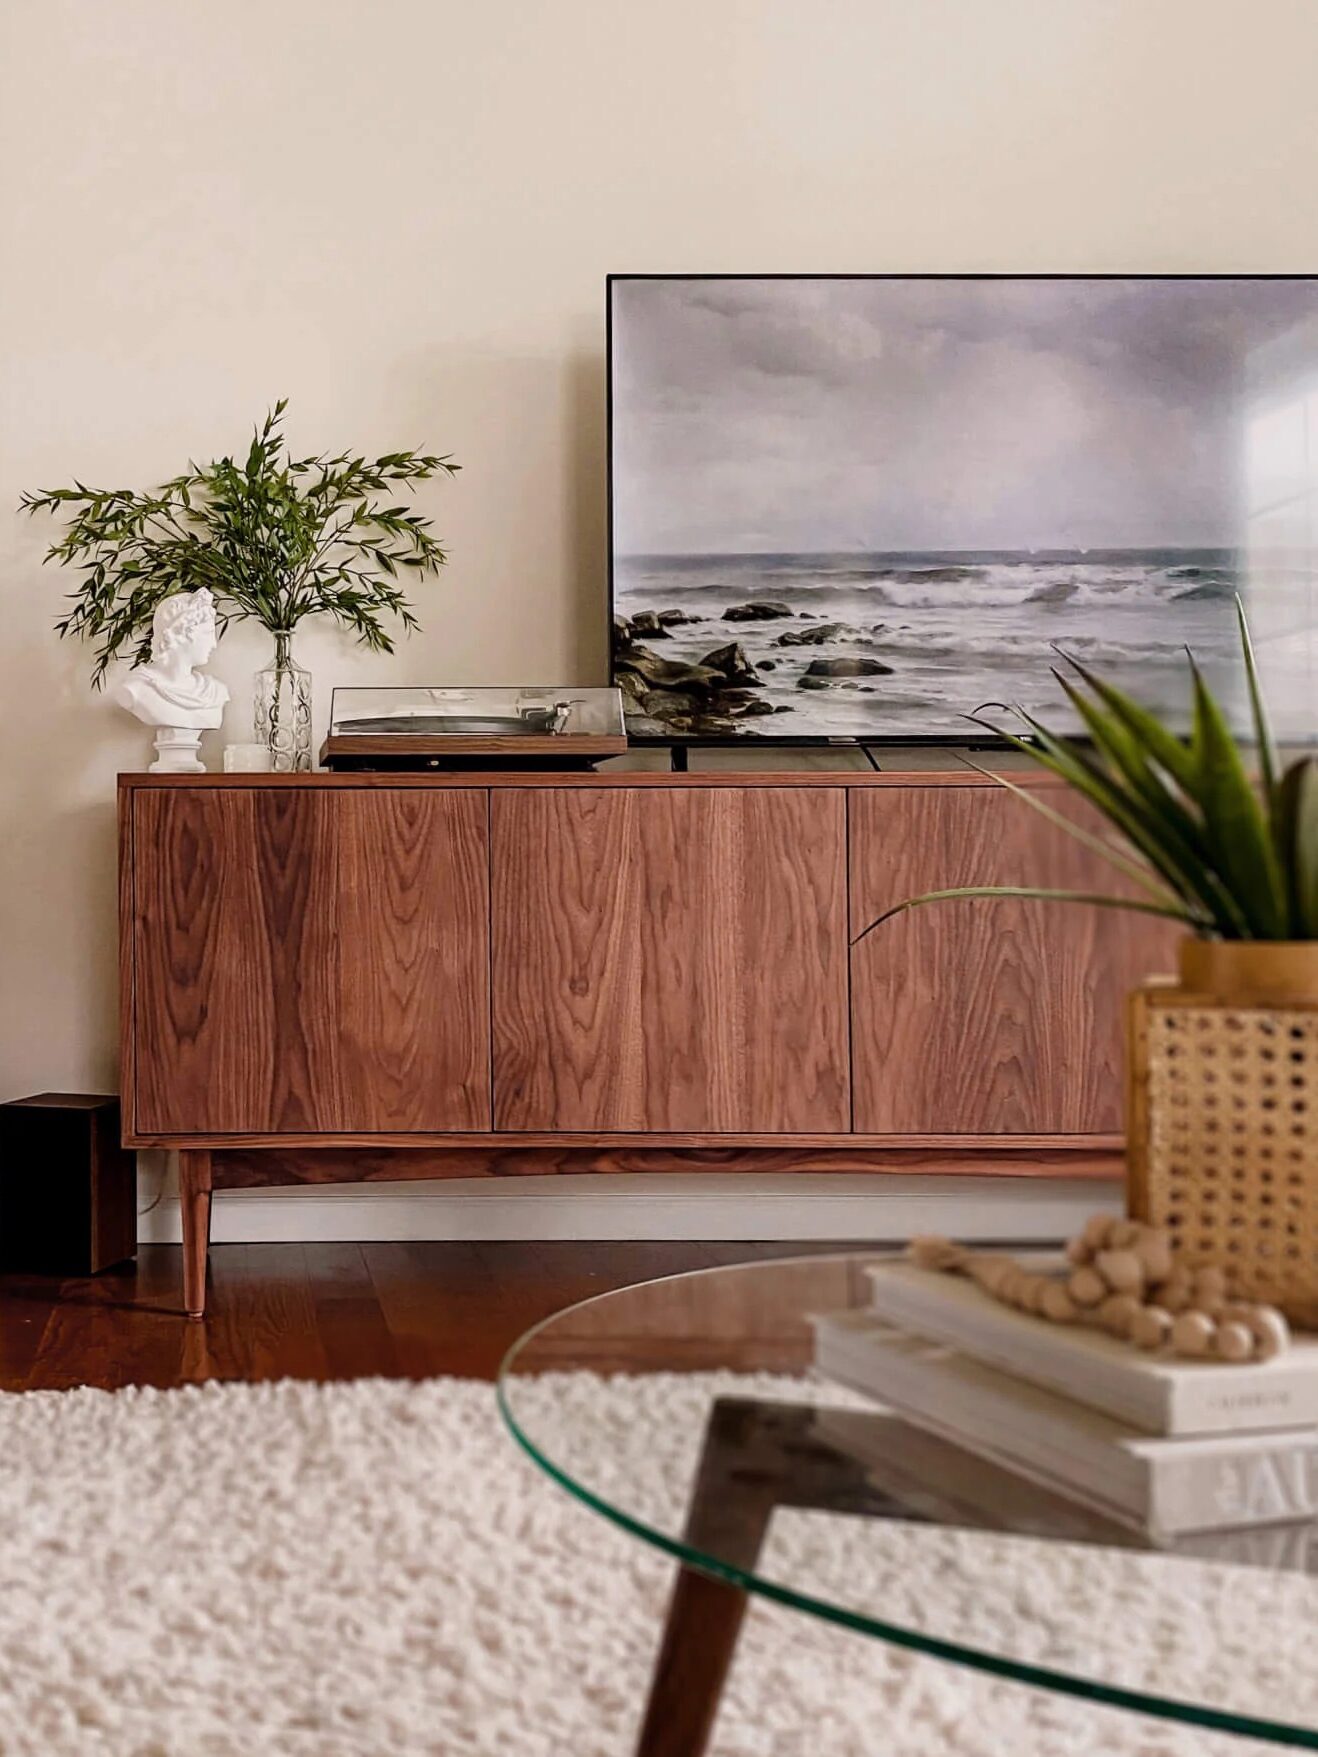 A modern living room features a wooden sideboard with a TV displaying a seascape, a plant, and a bust sculpture. A large mirror reflects an armchair, and a glass coffee table sits on a white rug.